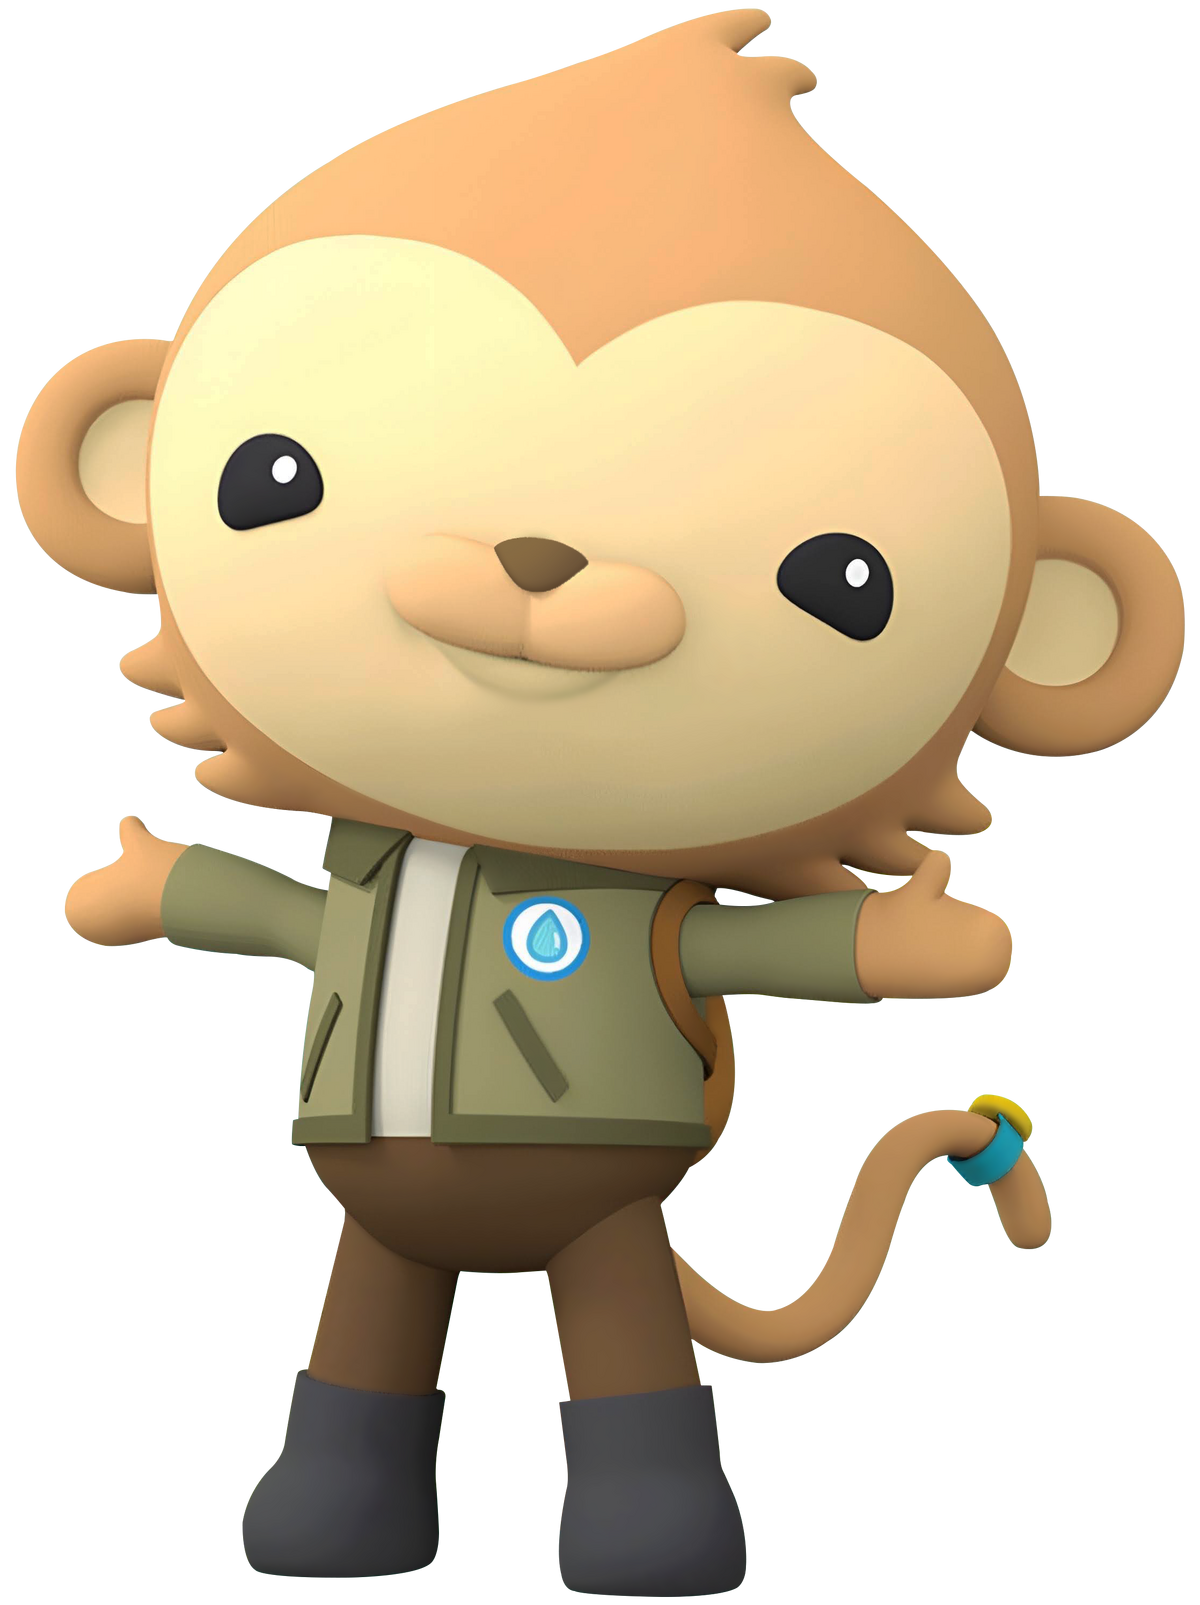 https://static.wikia.nocookie.net/octonauts/images/9/91/Paani_Octonauts_2.png/revision/latest/scale-to-width-down/1200?cb=20220425074512